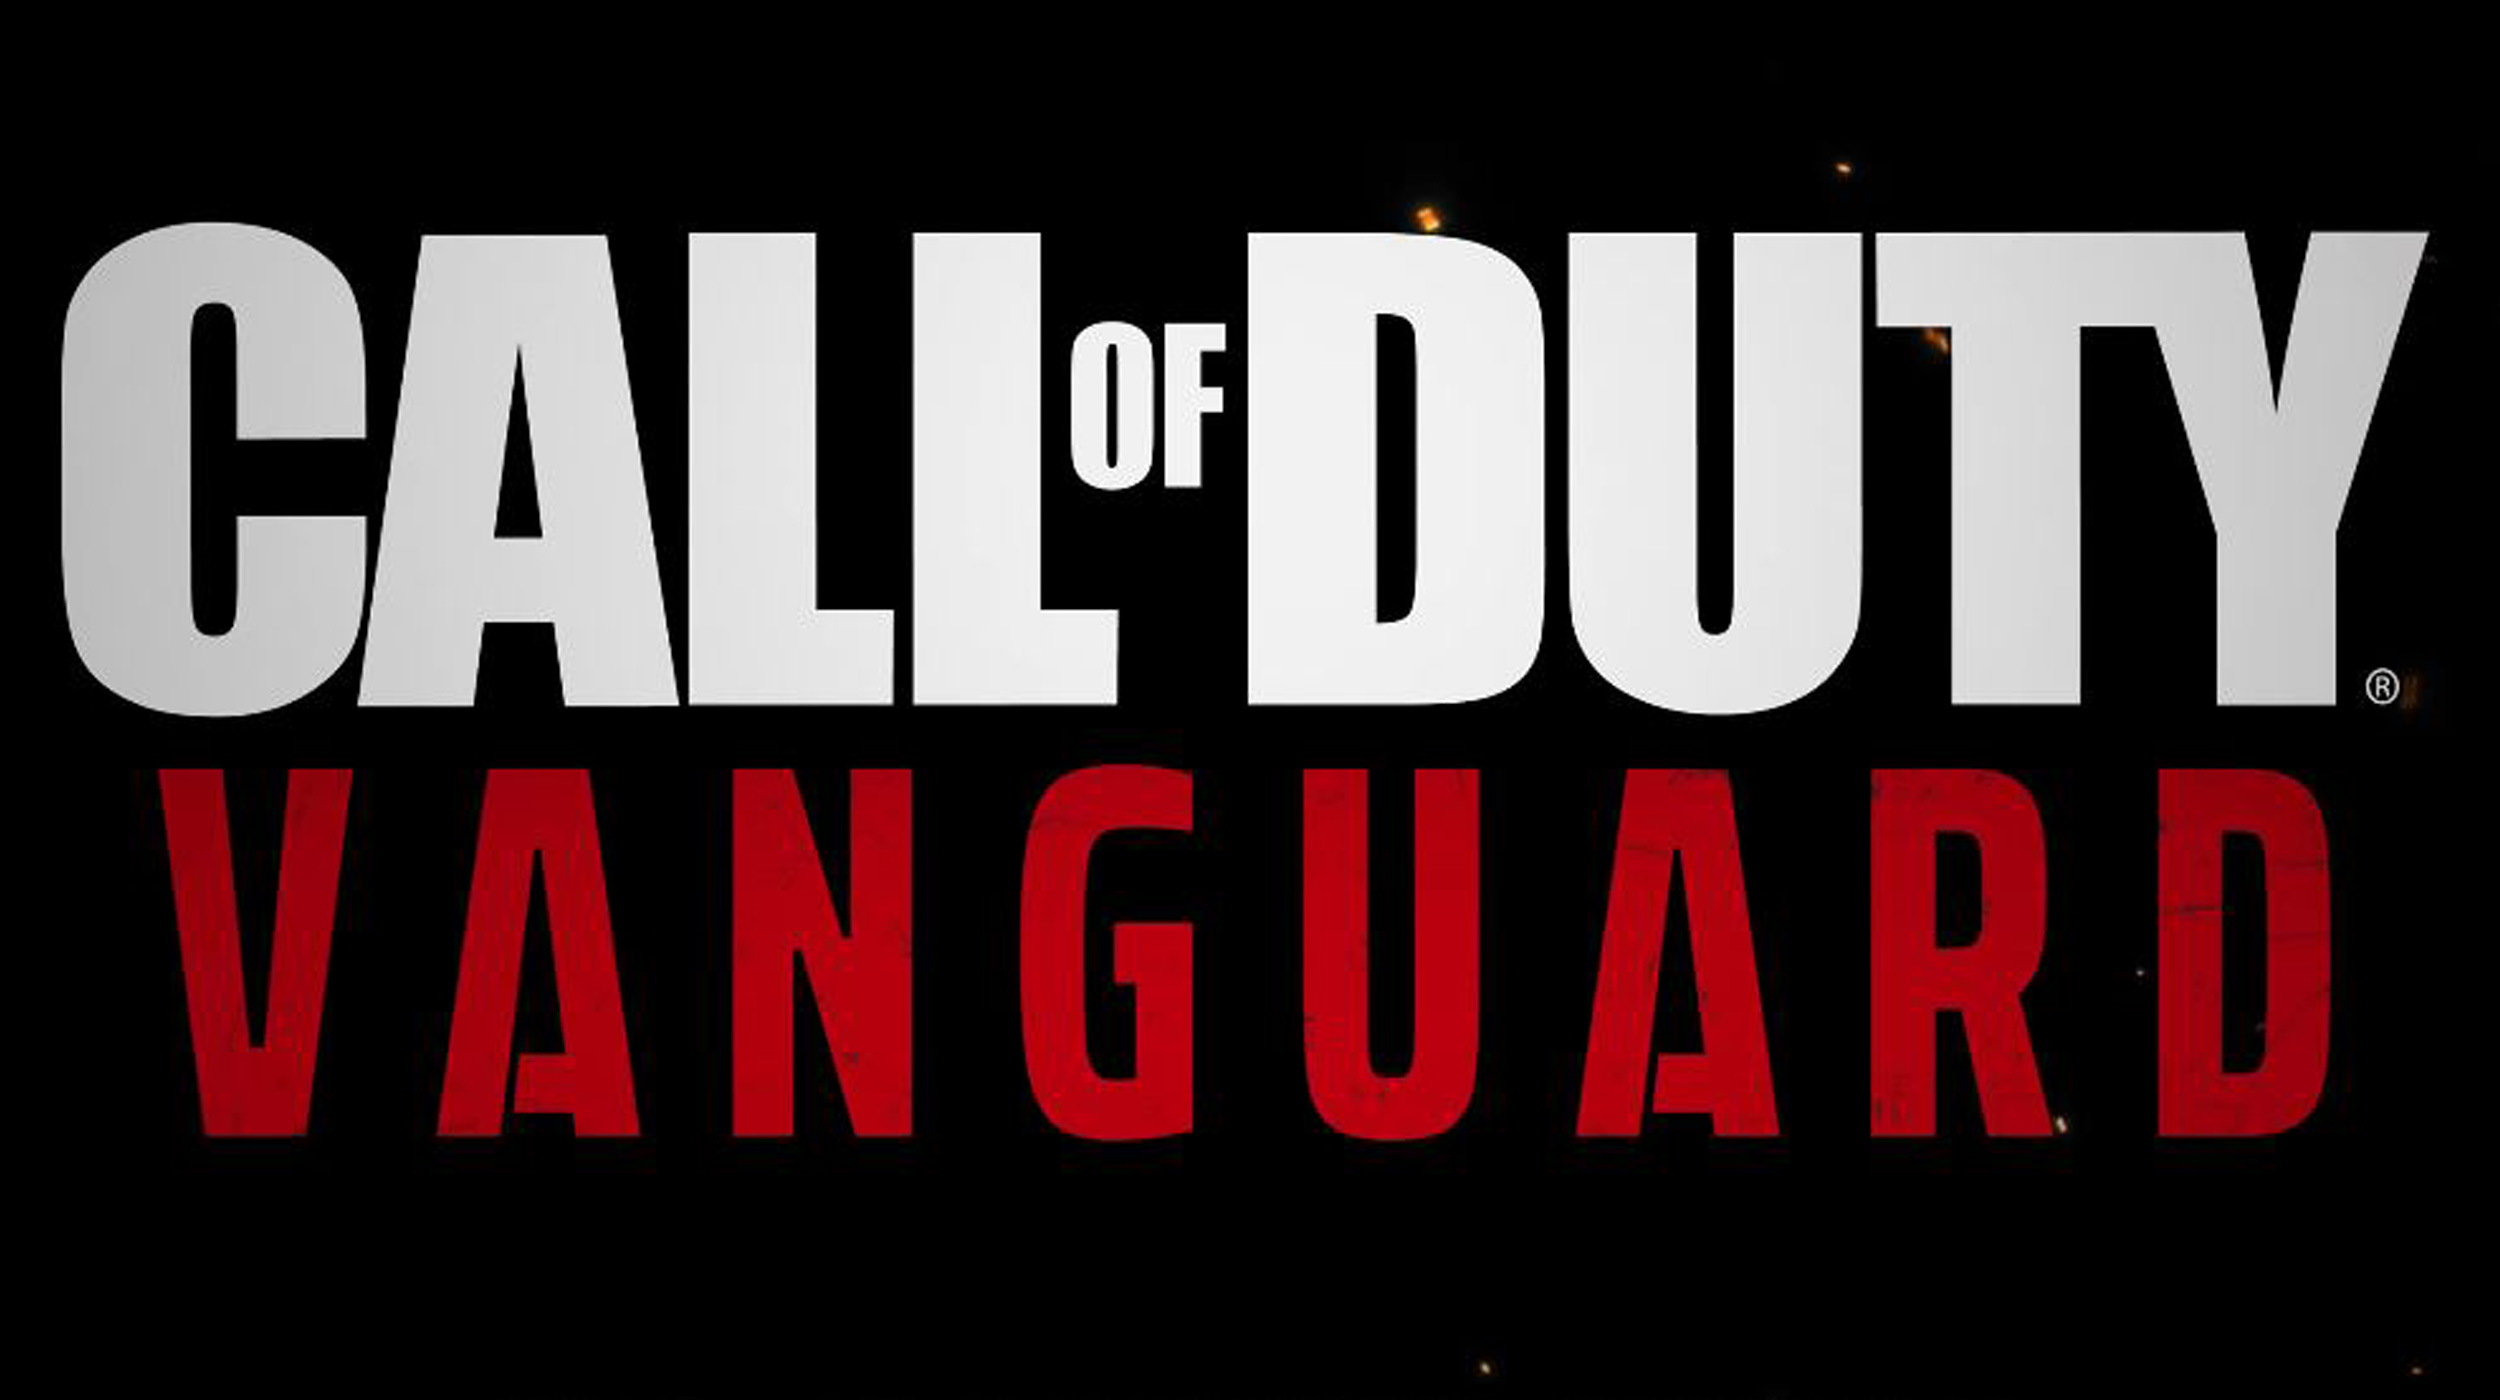 Call Of Duty Vanguard Could Get Revealed In Warzone